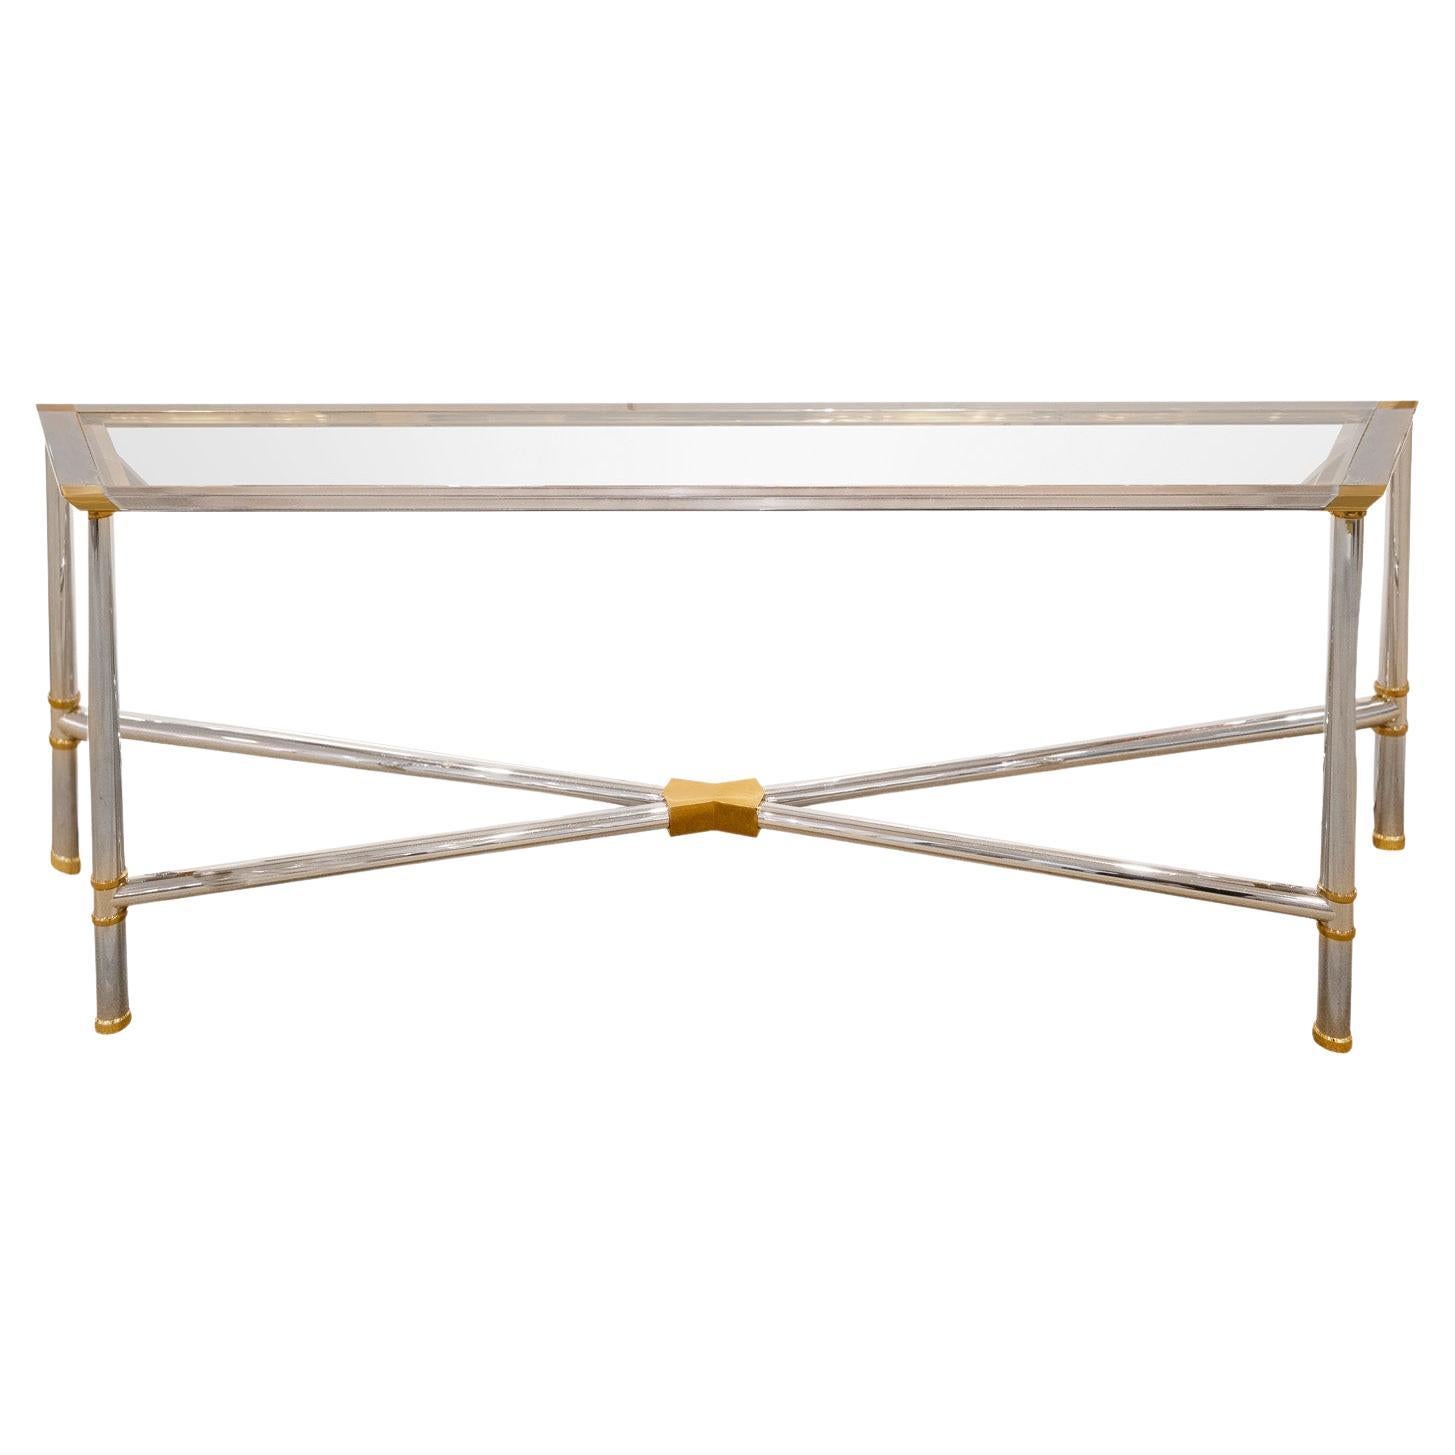 Karl Springer Rare Jansen Style Console Table in Polished Chrome and Brass 1980s For Sale